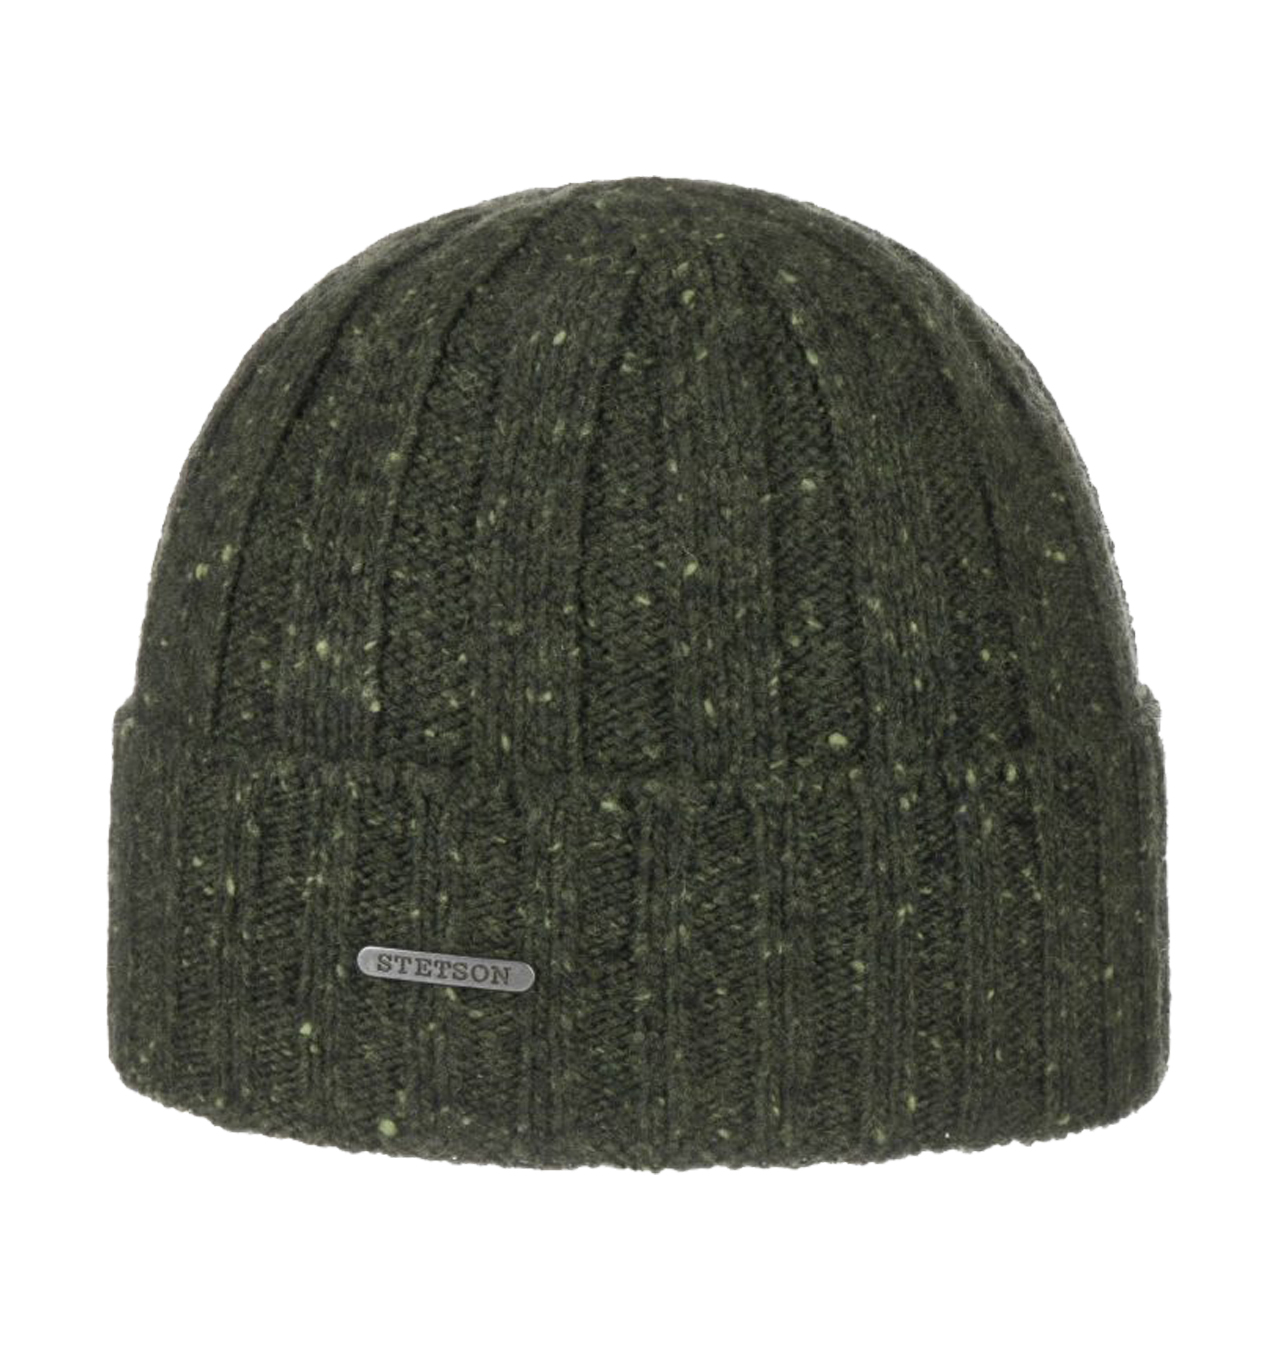 Stetson - Wisconsin Donegal Knit Beanie - Olive